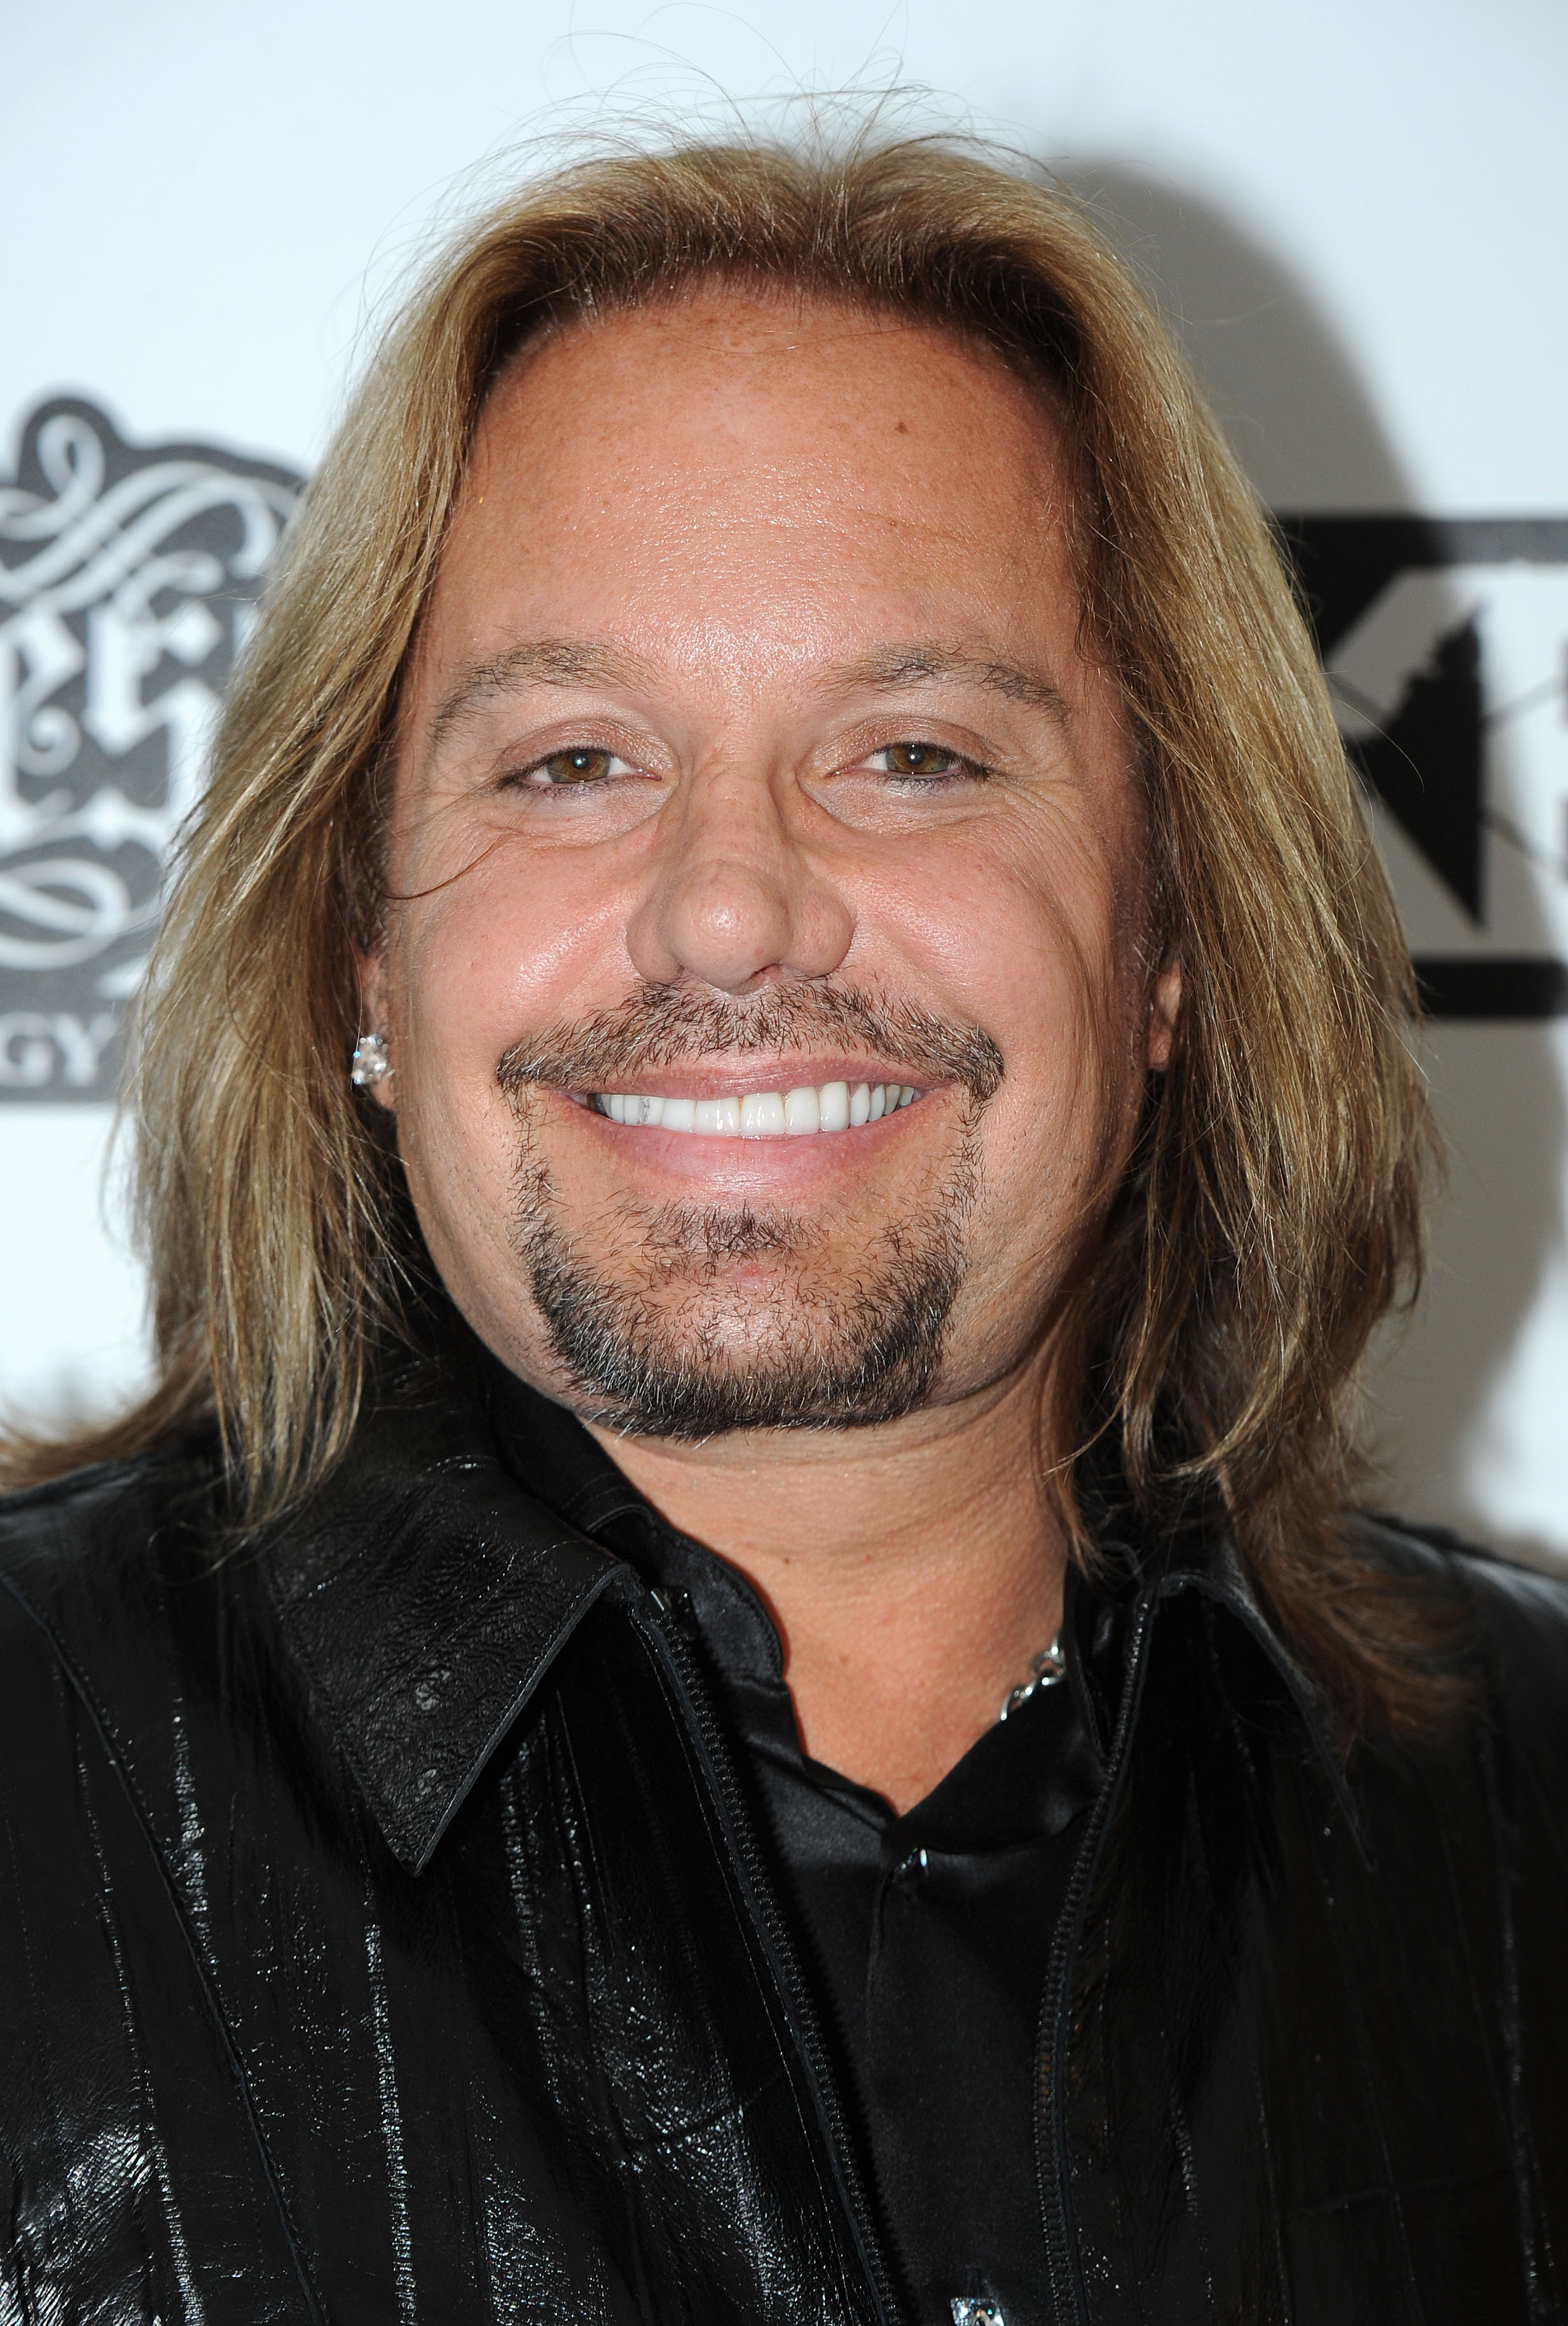 Vince Neil at the Kerrang! Awards in London, Britain on July 29, 2010 | Source: Getty Images